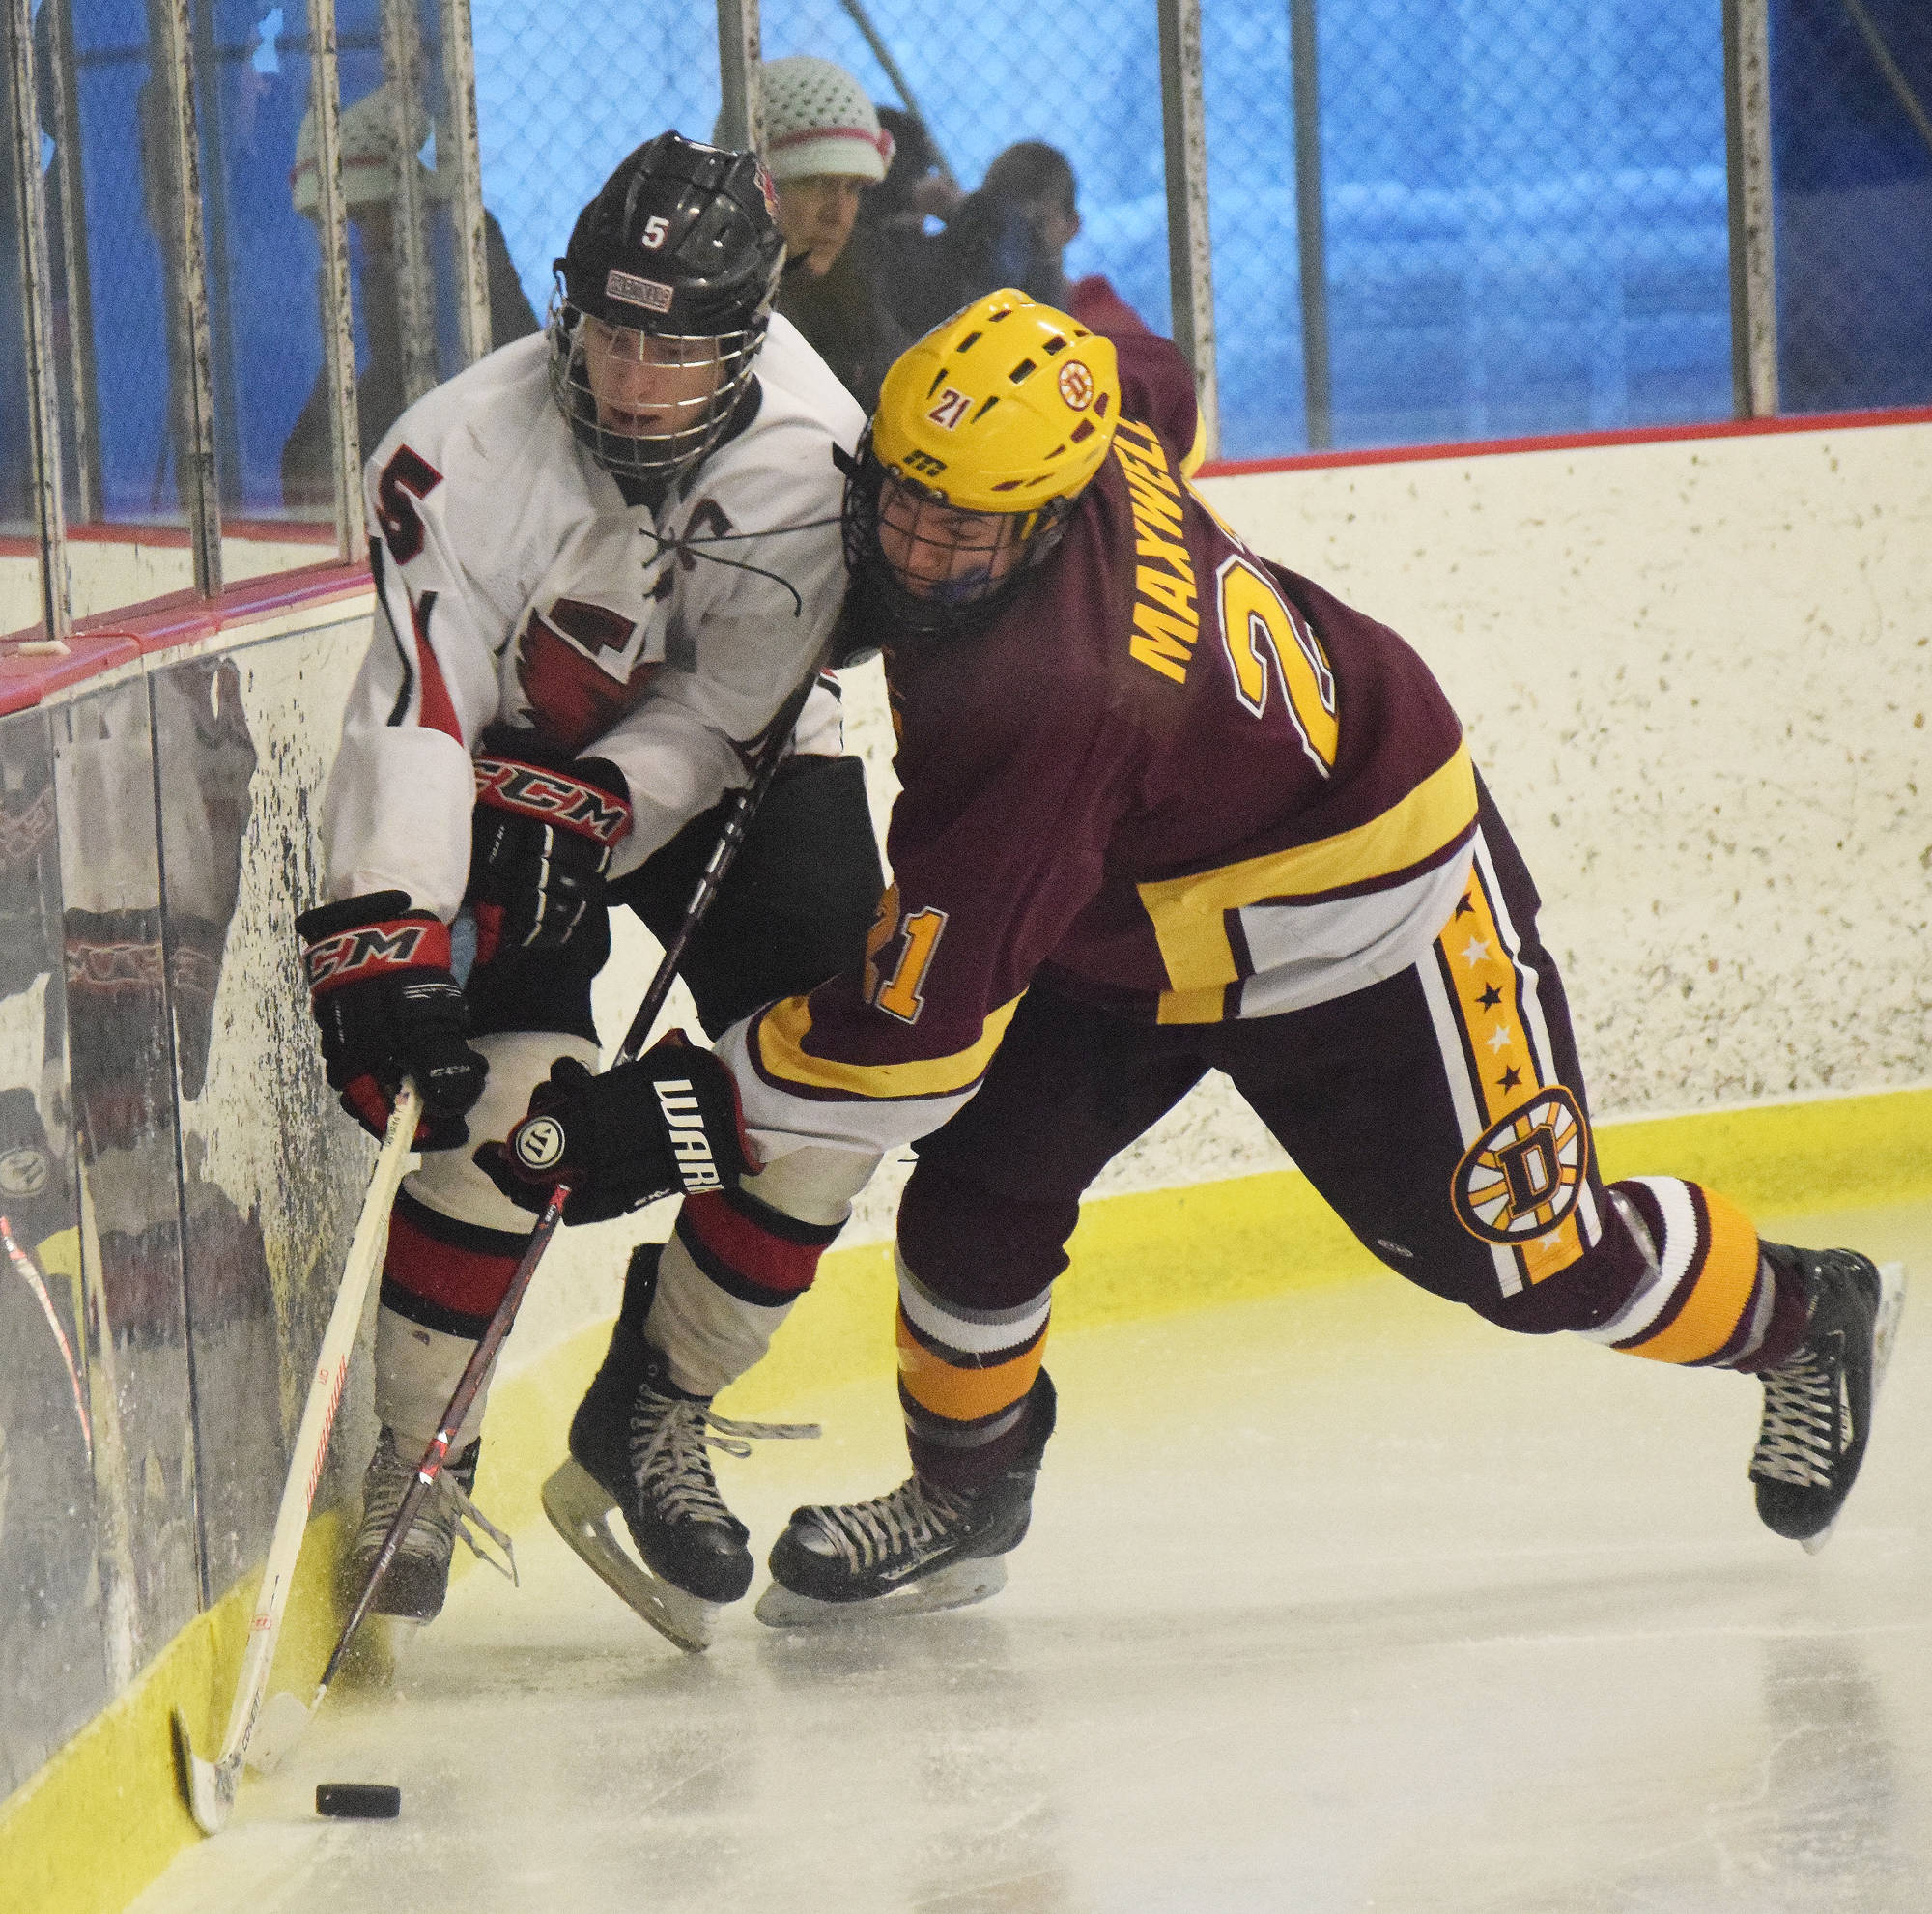 Kenai skater Levi Mese battles for the puck against Dimond’s Justin Maxwell (right) Saturday afternoon at the Kenai Multipurpose Facility. (Photo by Joey Klecka/Peninsula Clarion)